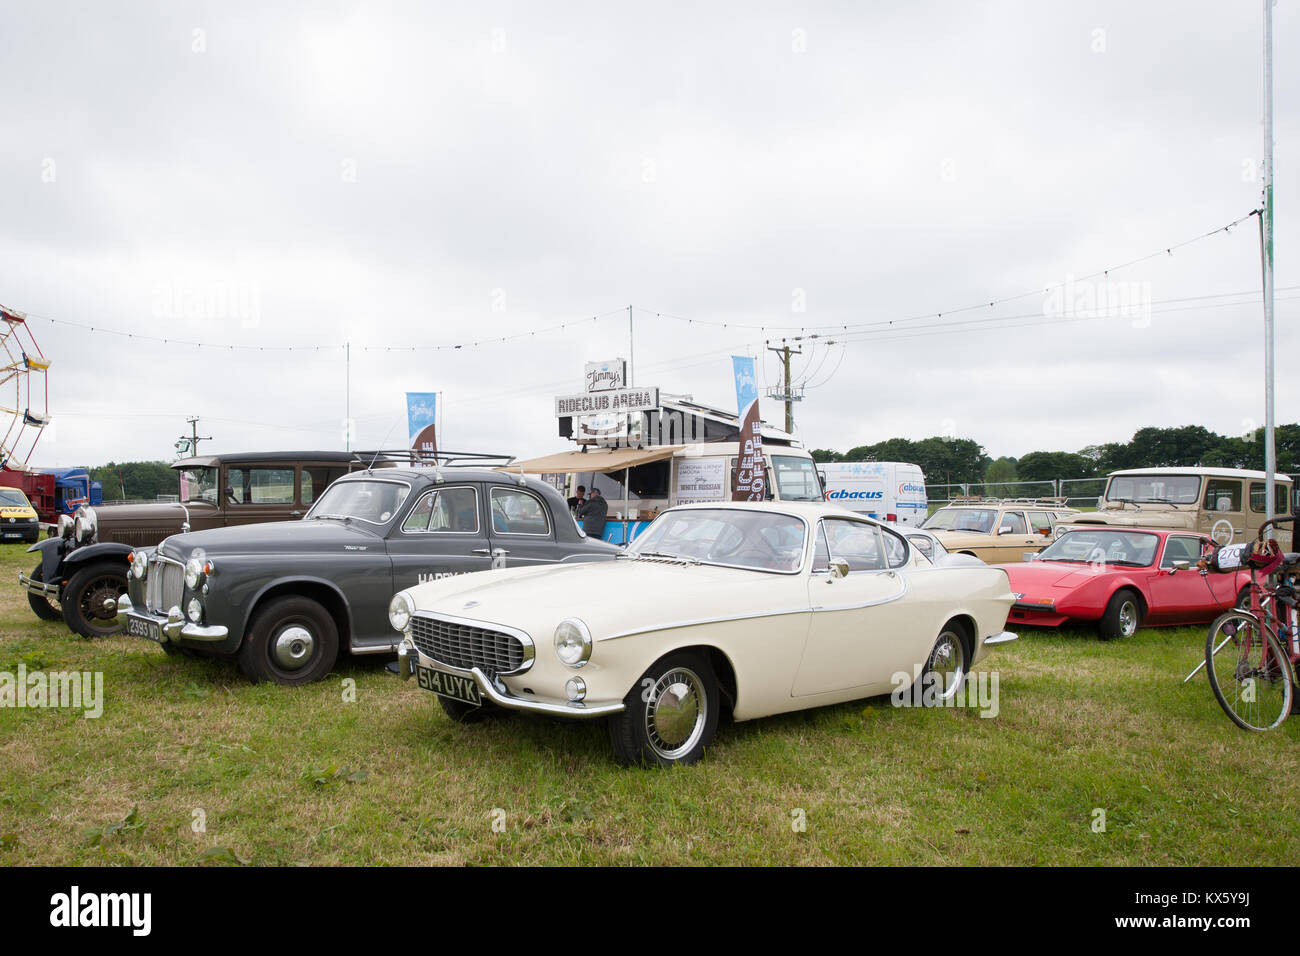 Classic cars at a vintage festival Stock Photo